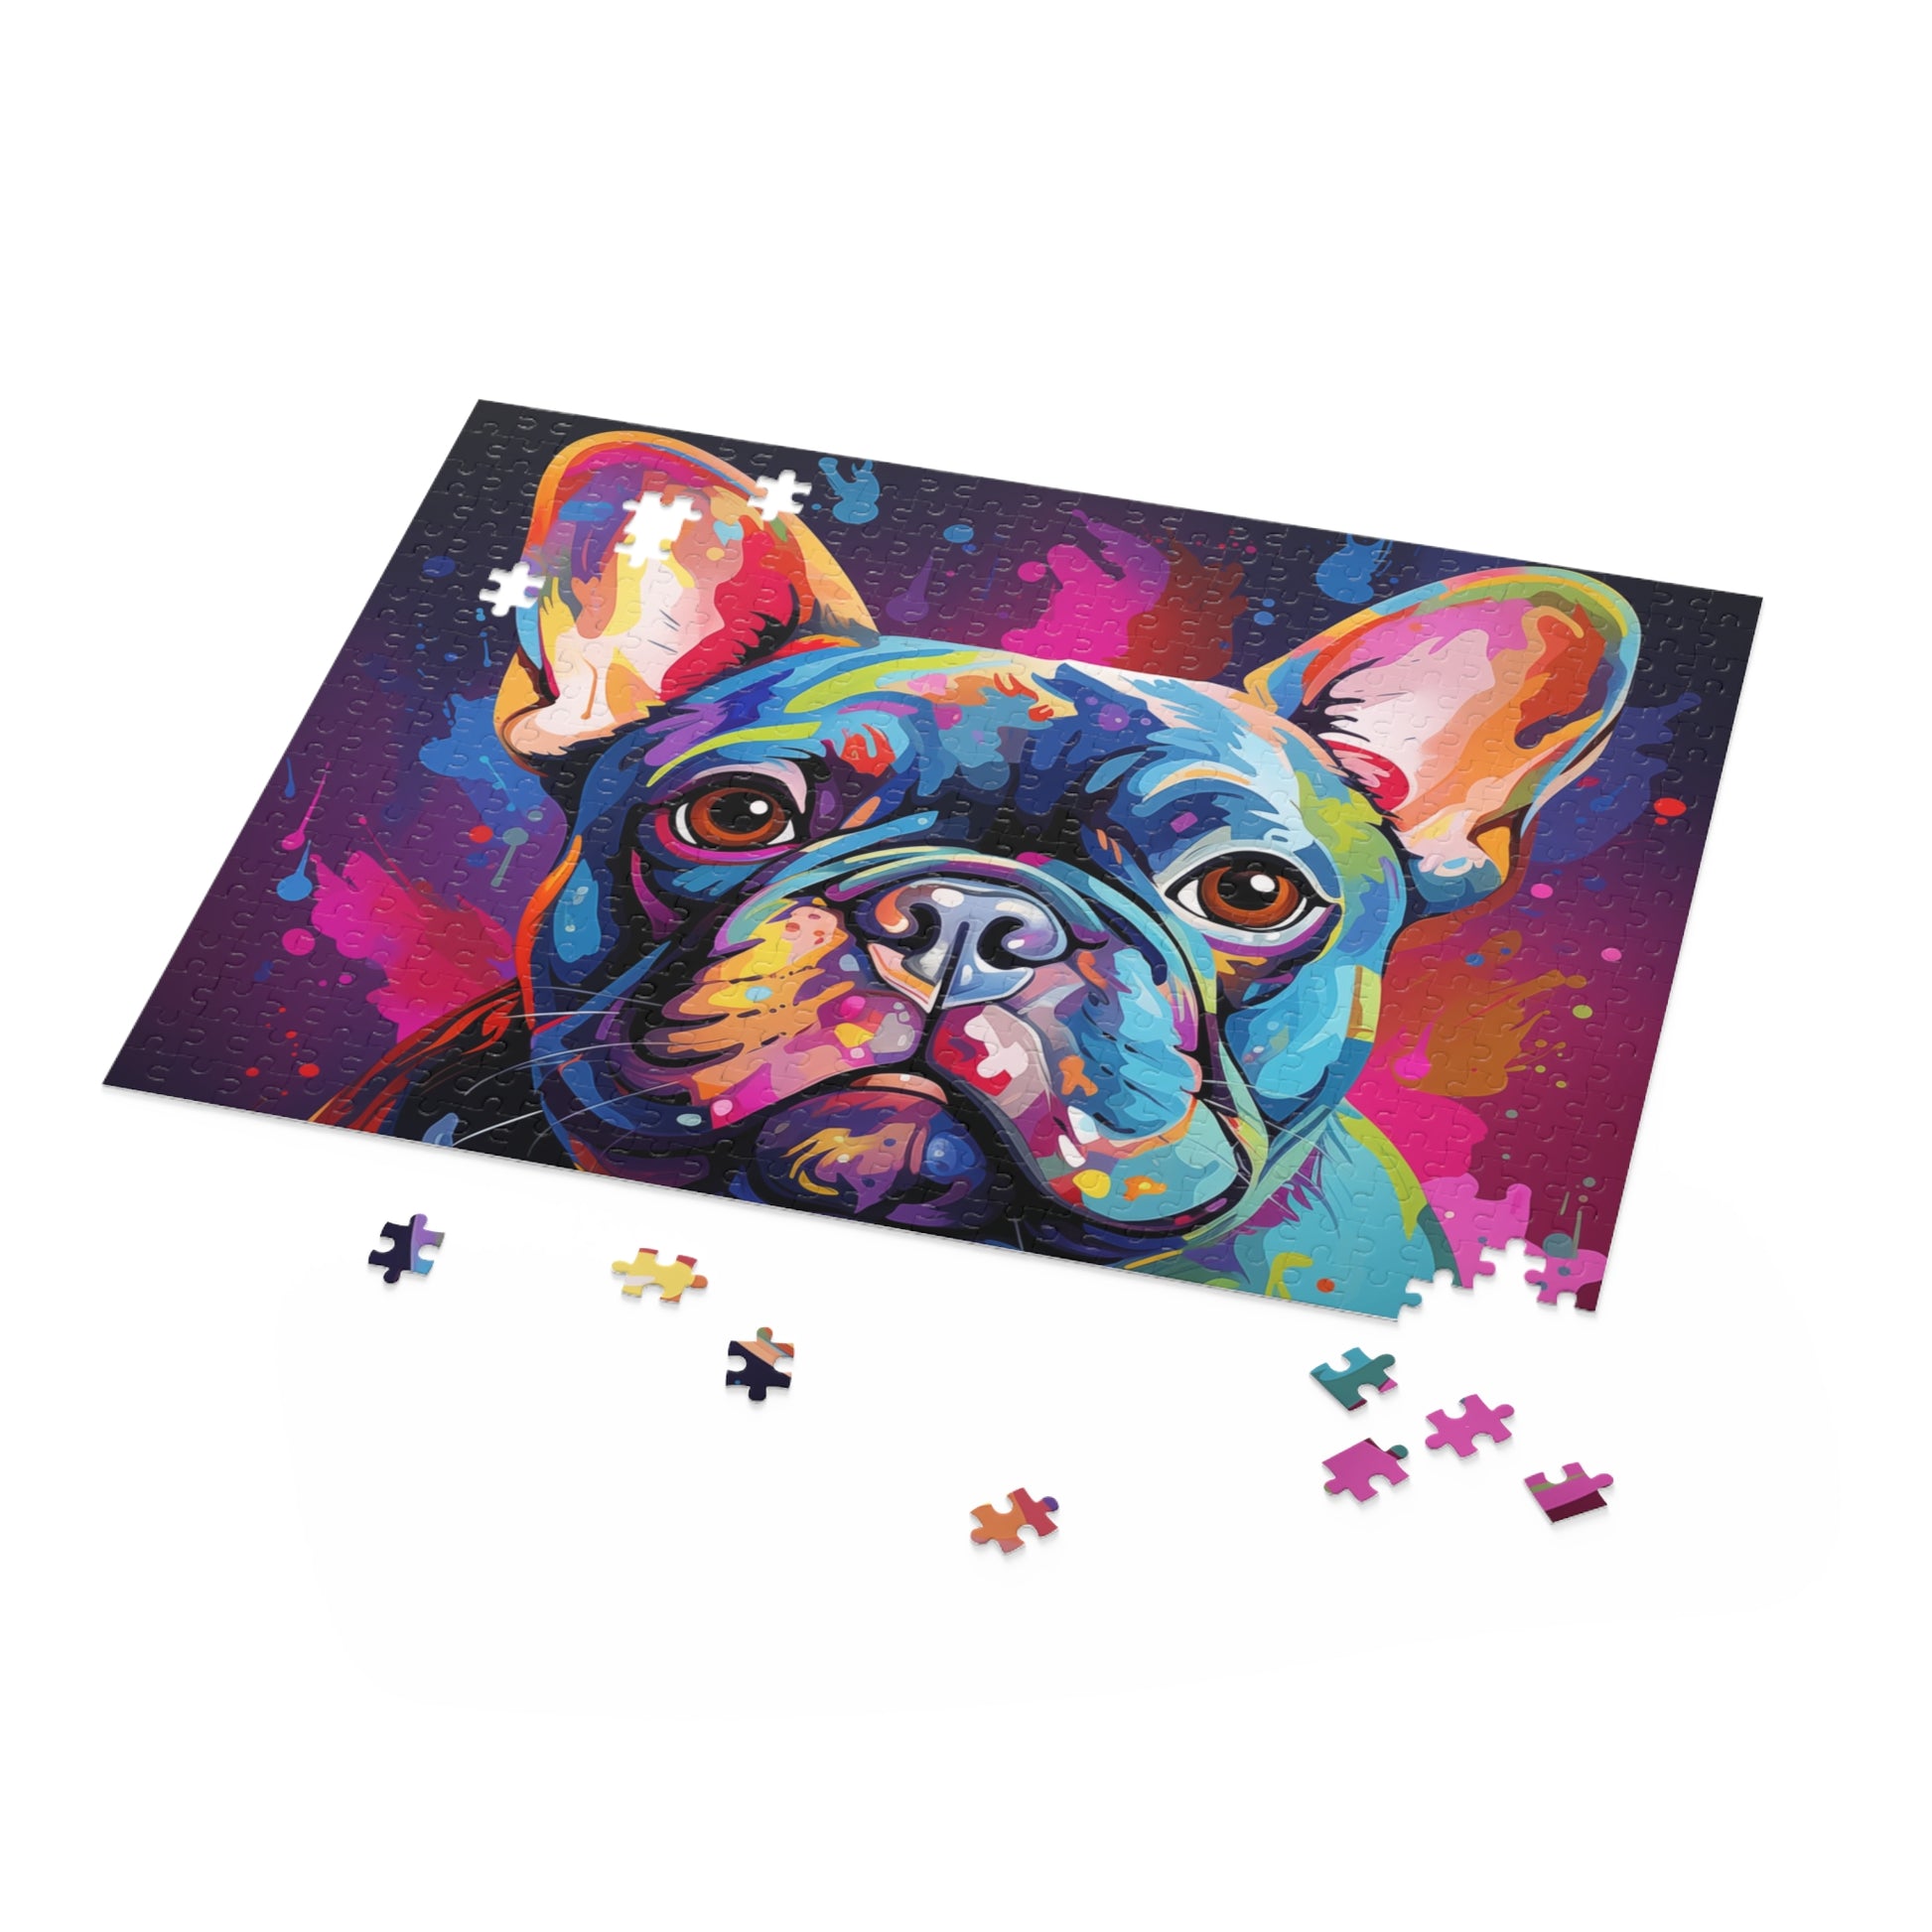 Oil Paint Watercolor Abstract Frenchie Dog Jigsaw Puzzle Adult Birthday Business Jigsaw Puzzle Gift for Him Funny Humorous Indoor Outdoor Game Gift For Her Online-5